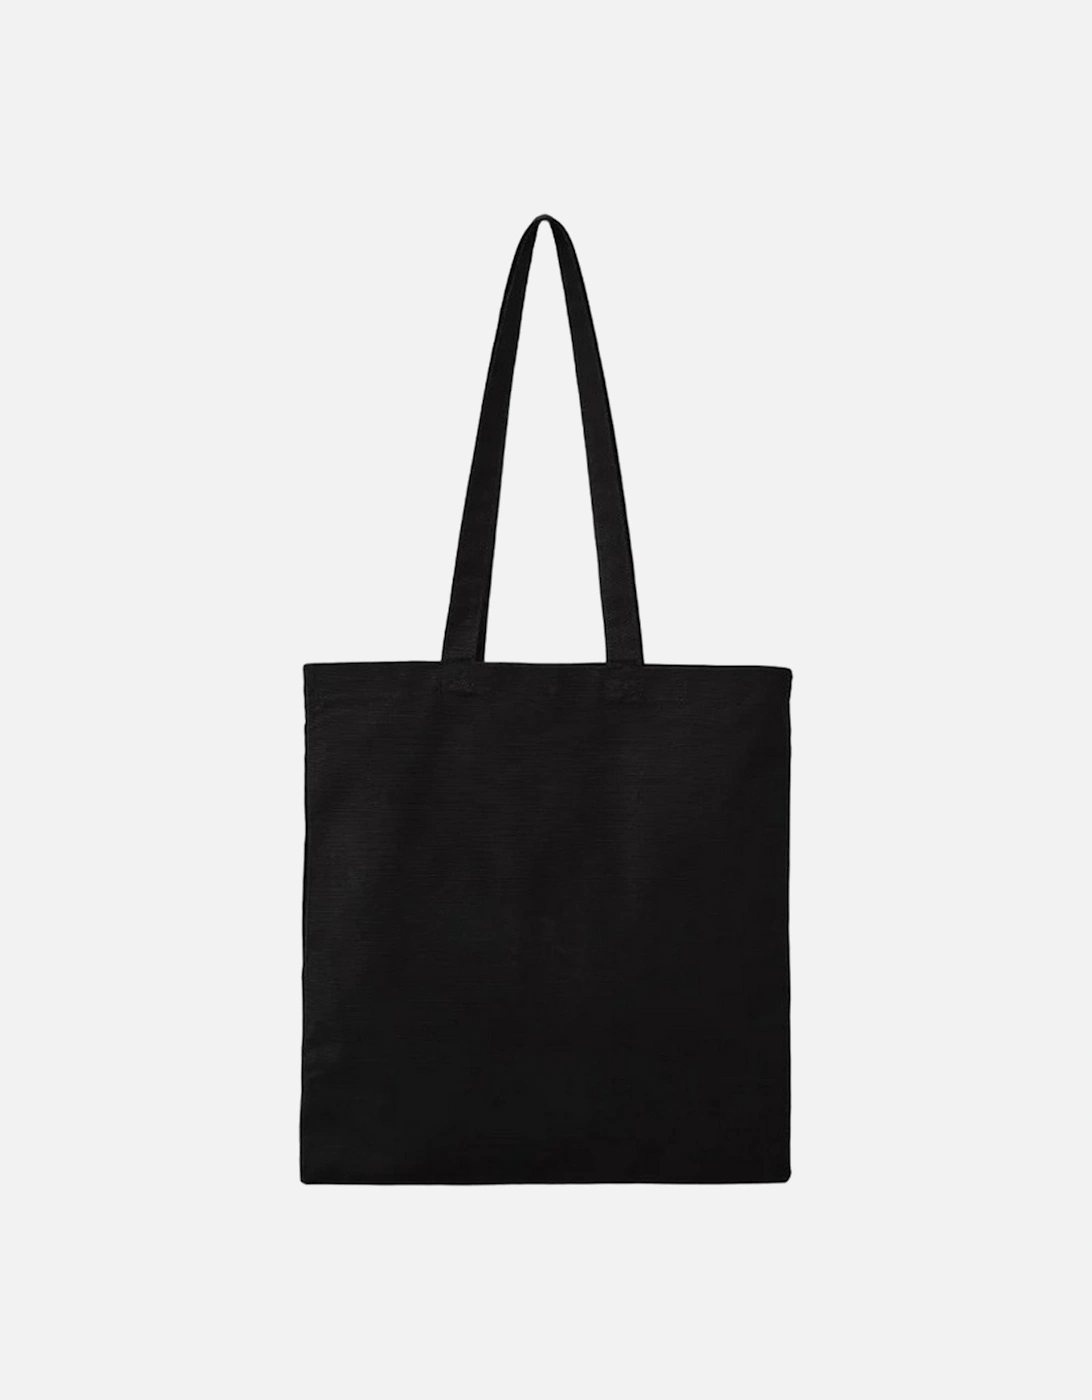 Dookie Green Day Tote Bag